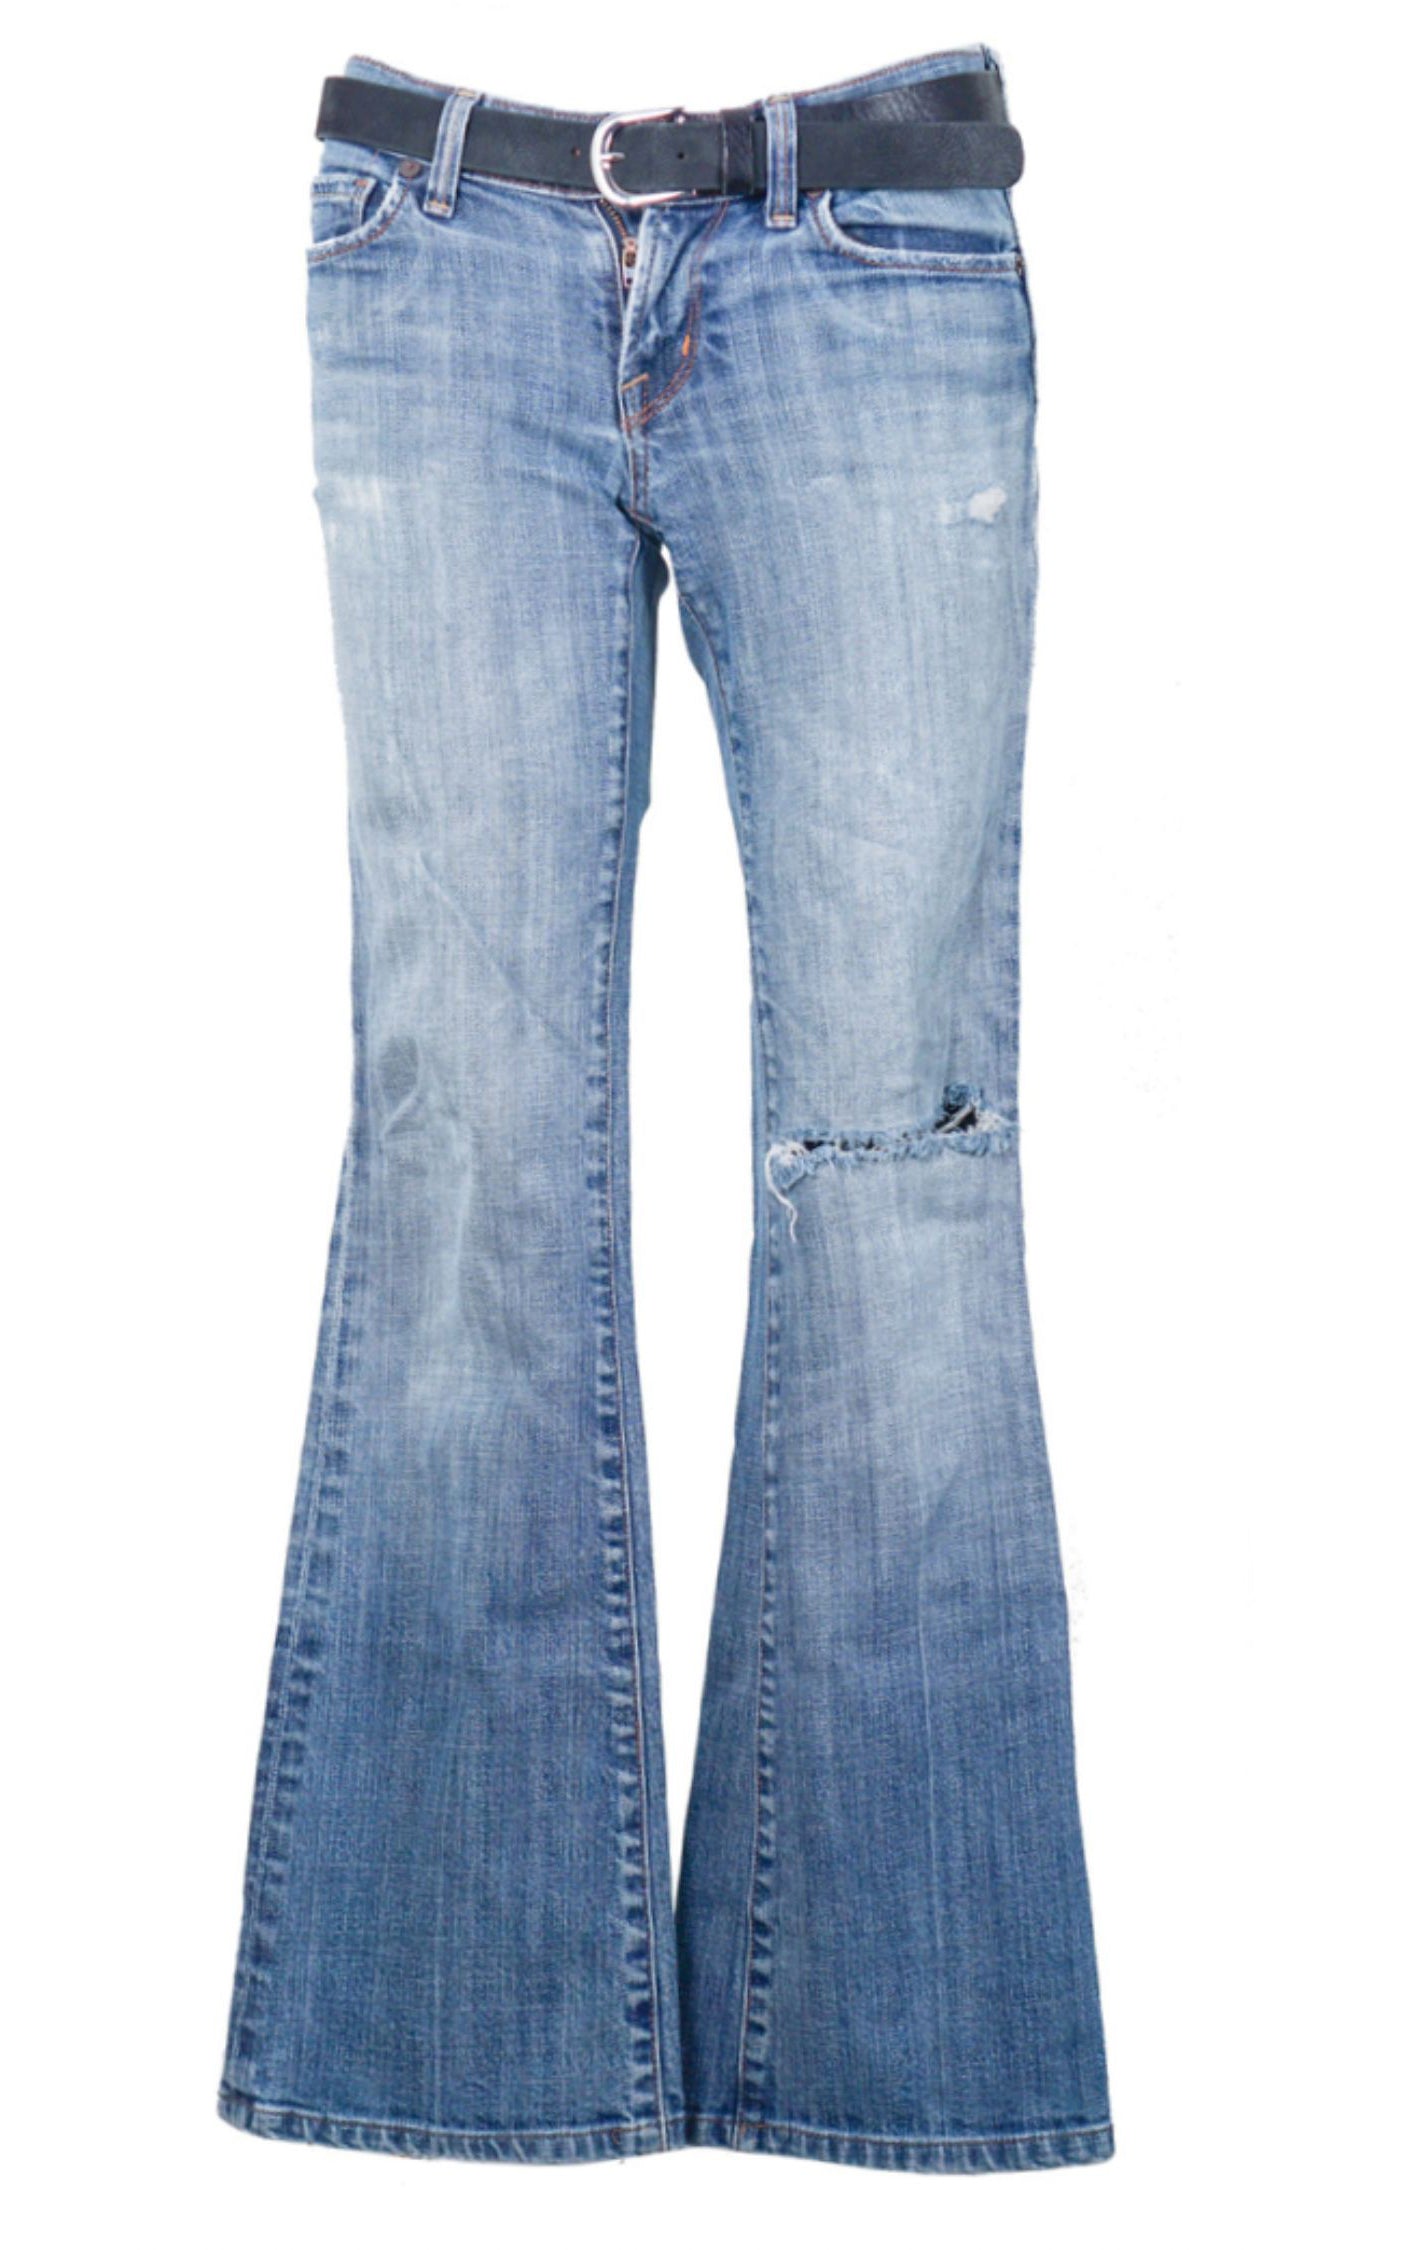 CITIZENS OF HUMANITY Flared Bootcut Jeans resellum